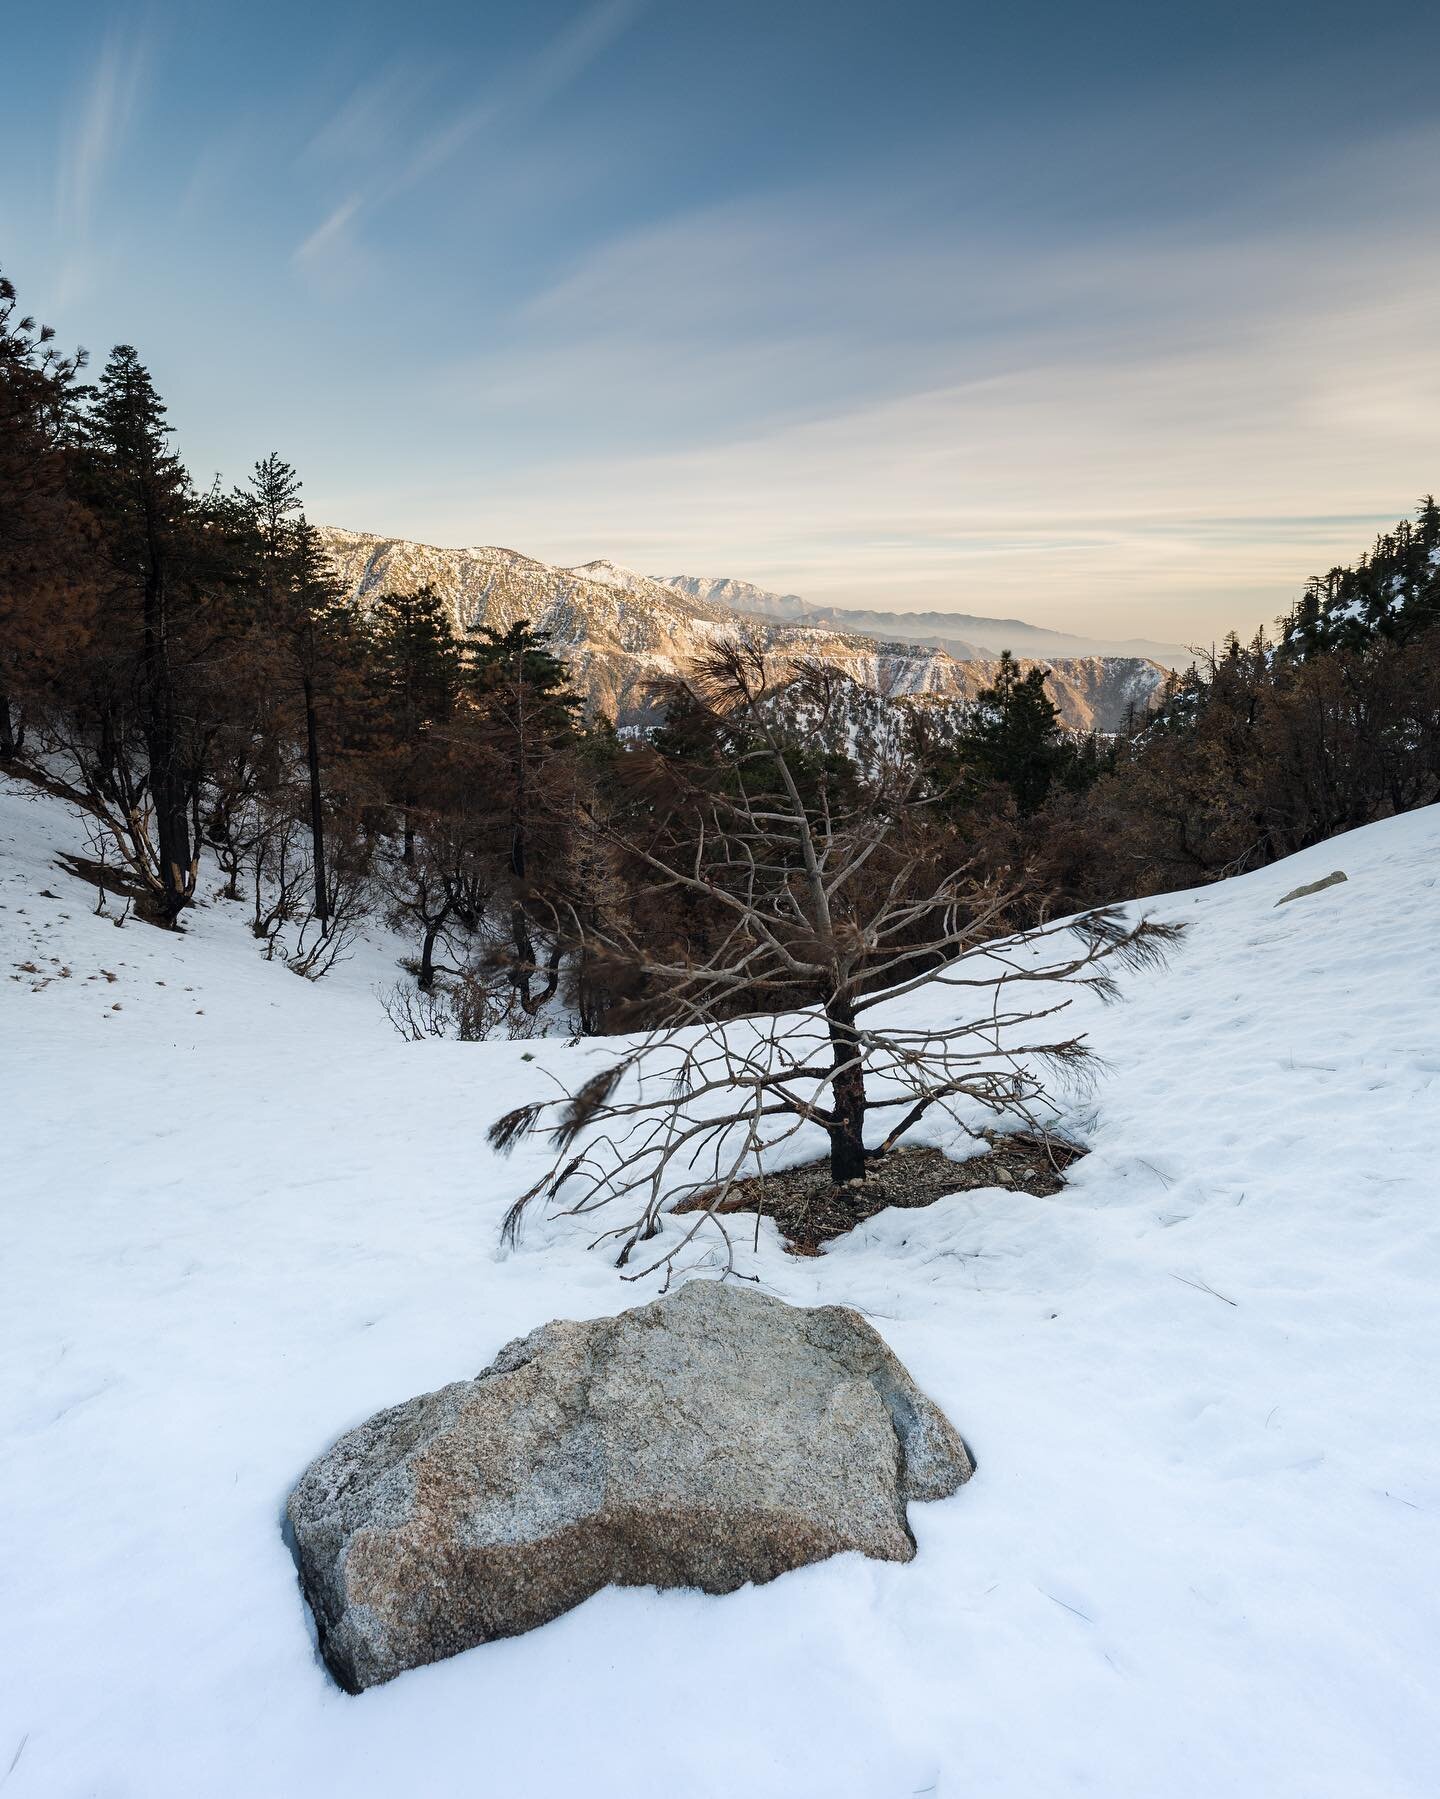 Compositional faux pas pt. 1

Winter of 2020 in the Angeles National Forest. 
.
.
.
.
.
#angelesnationalforest #winterwonderland #californiamountains #nisiglobal #nisiopticsusa #landscapephotography #landscapephotographer #lawinter #treesofinstagram 